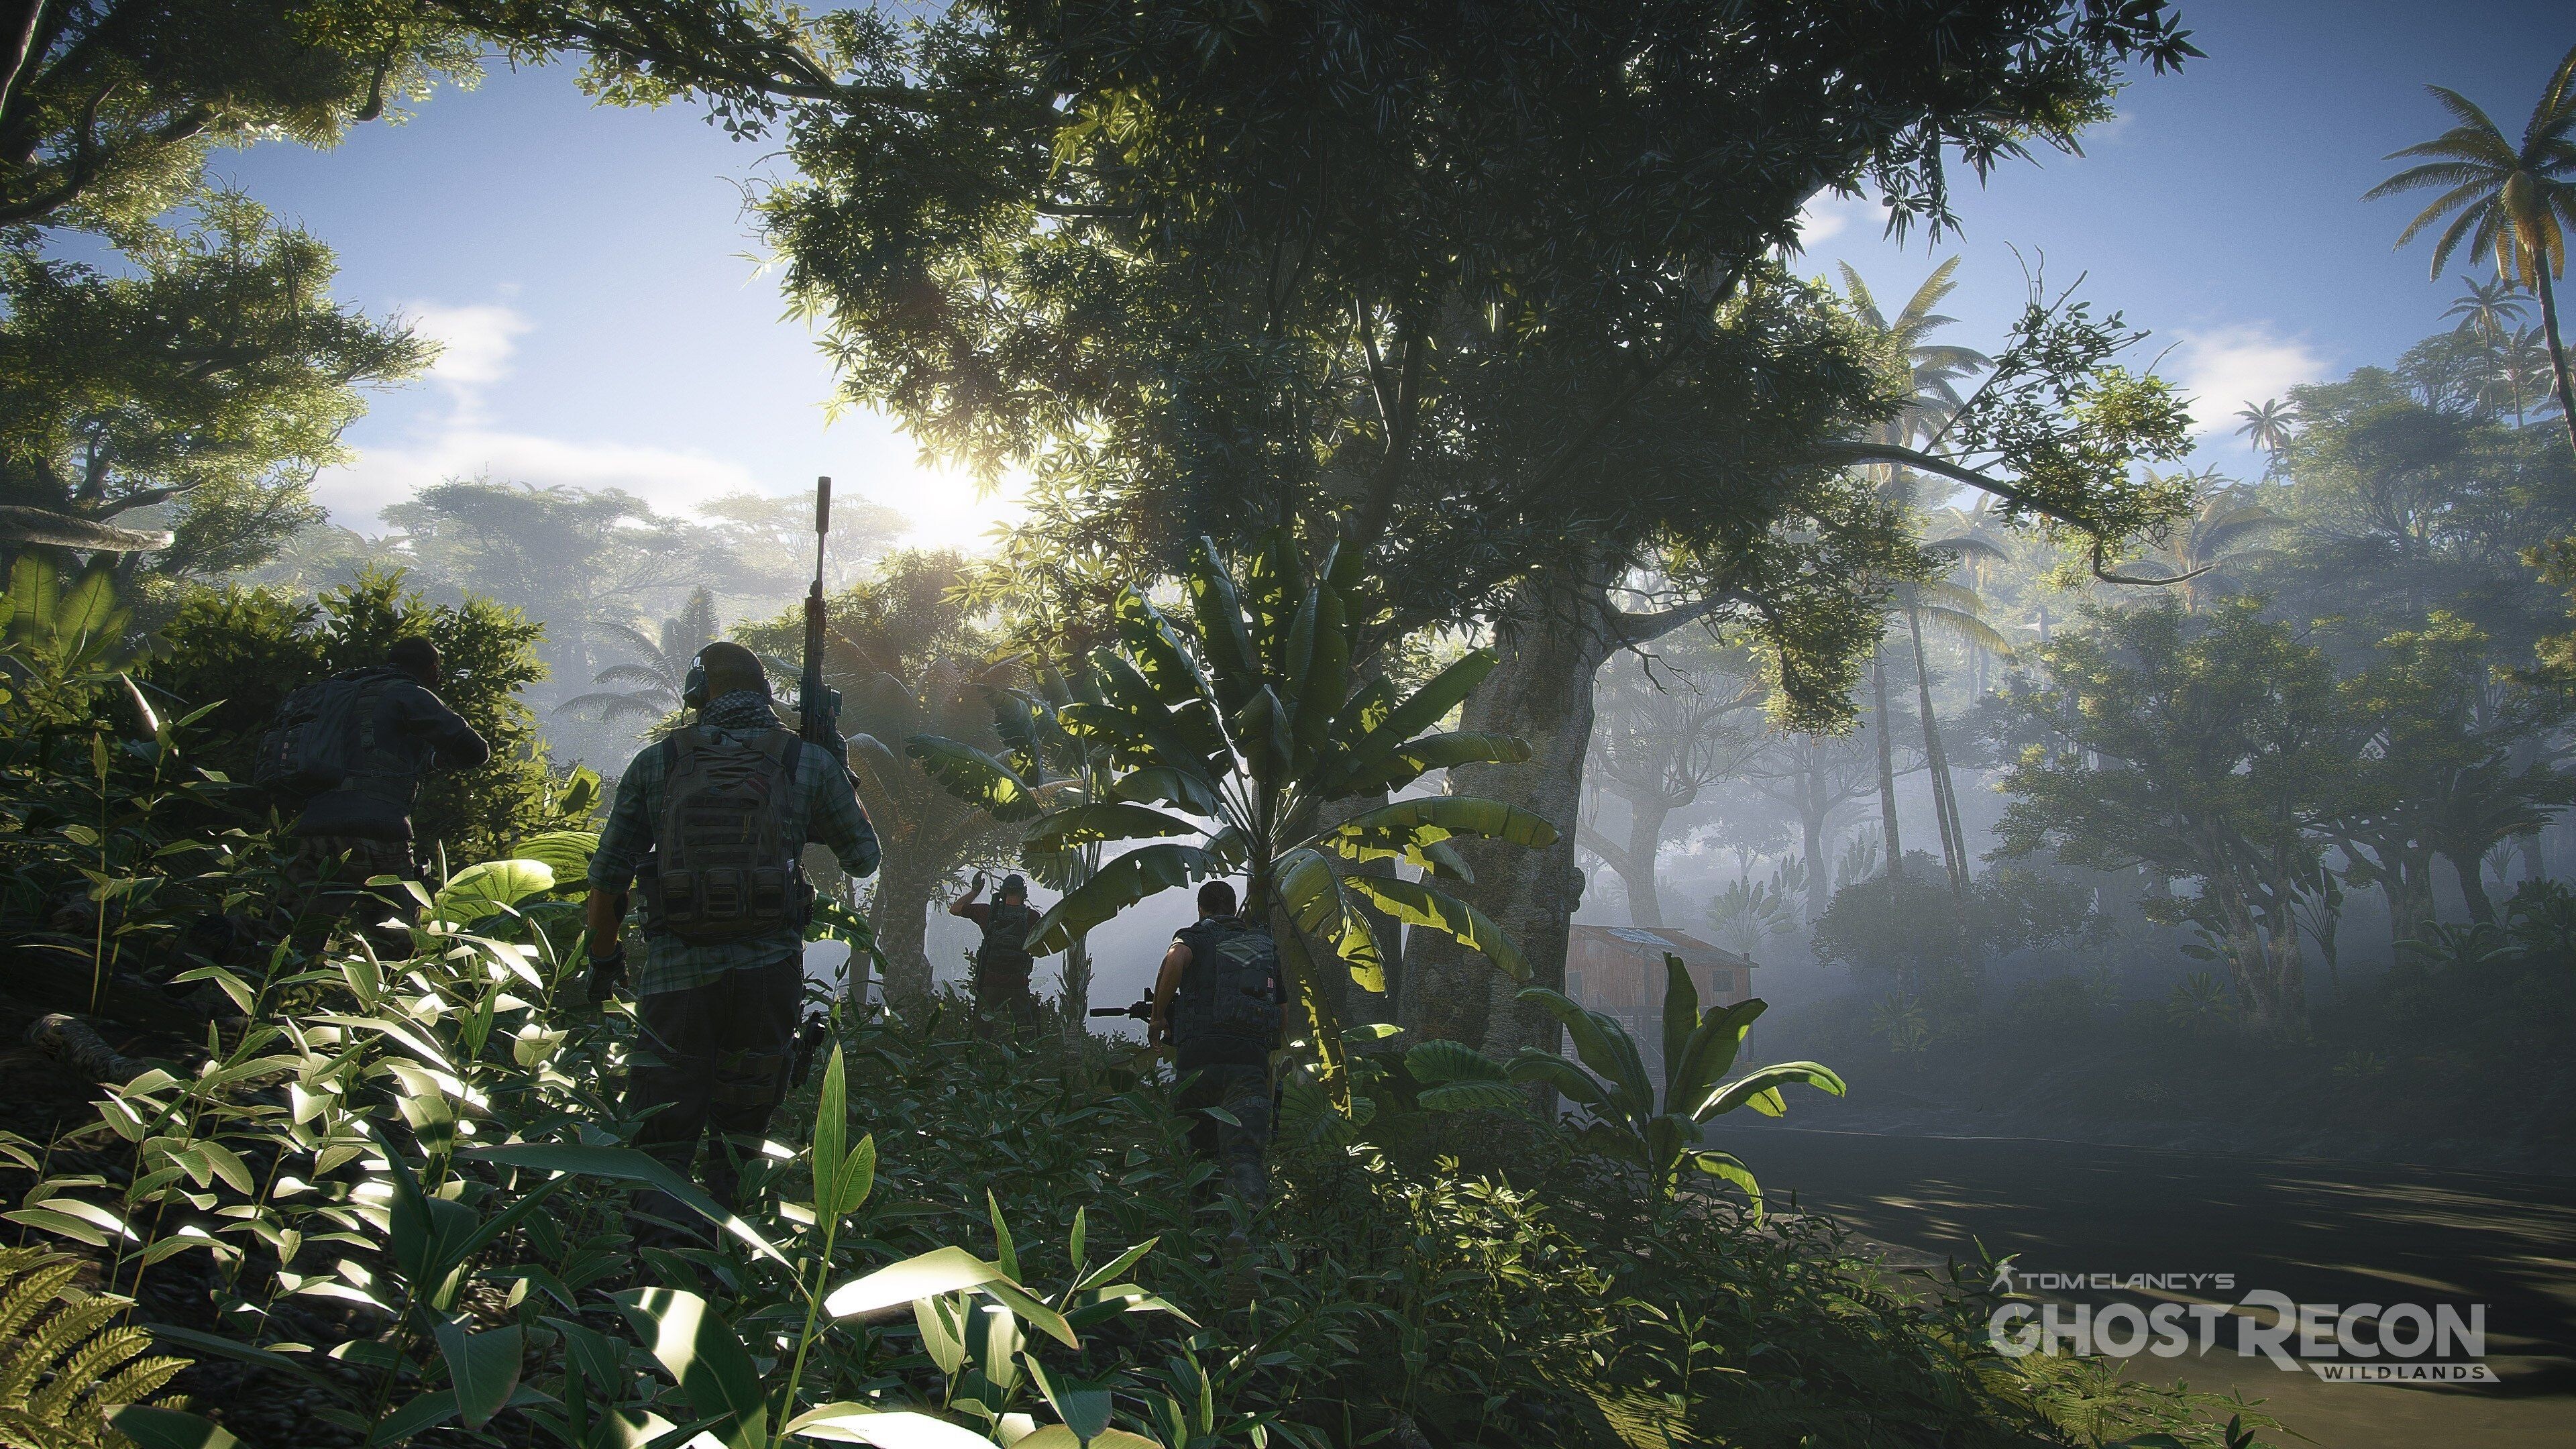 Ghost Recon: Wildlands: Predator, The joint operation squad looks for the Predator in Bolivian jungles, Downloadable pack. 3840x2160 4K Background.